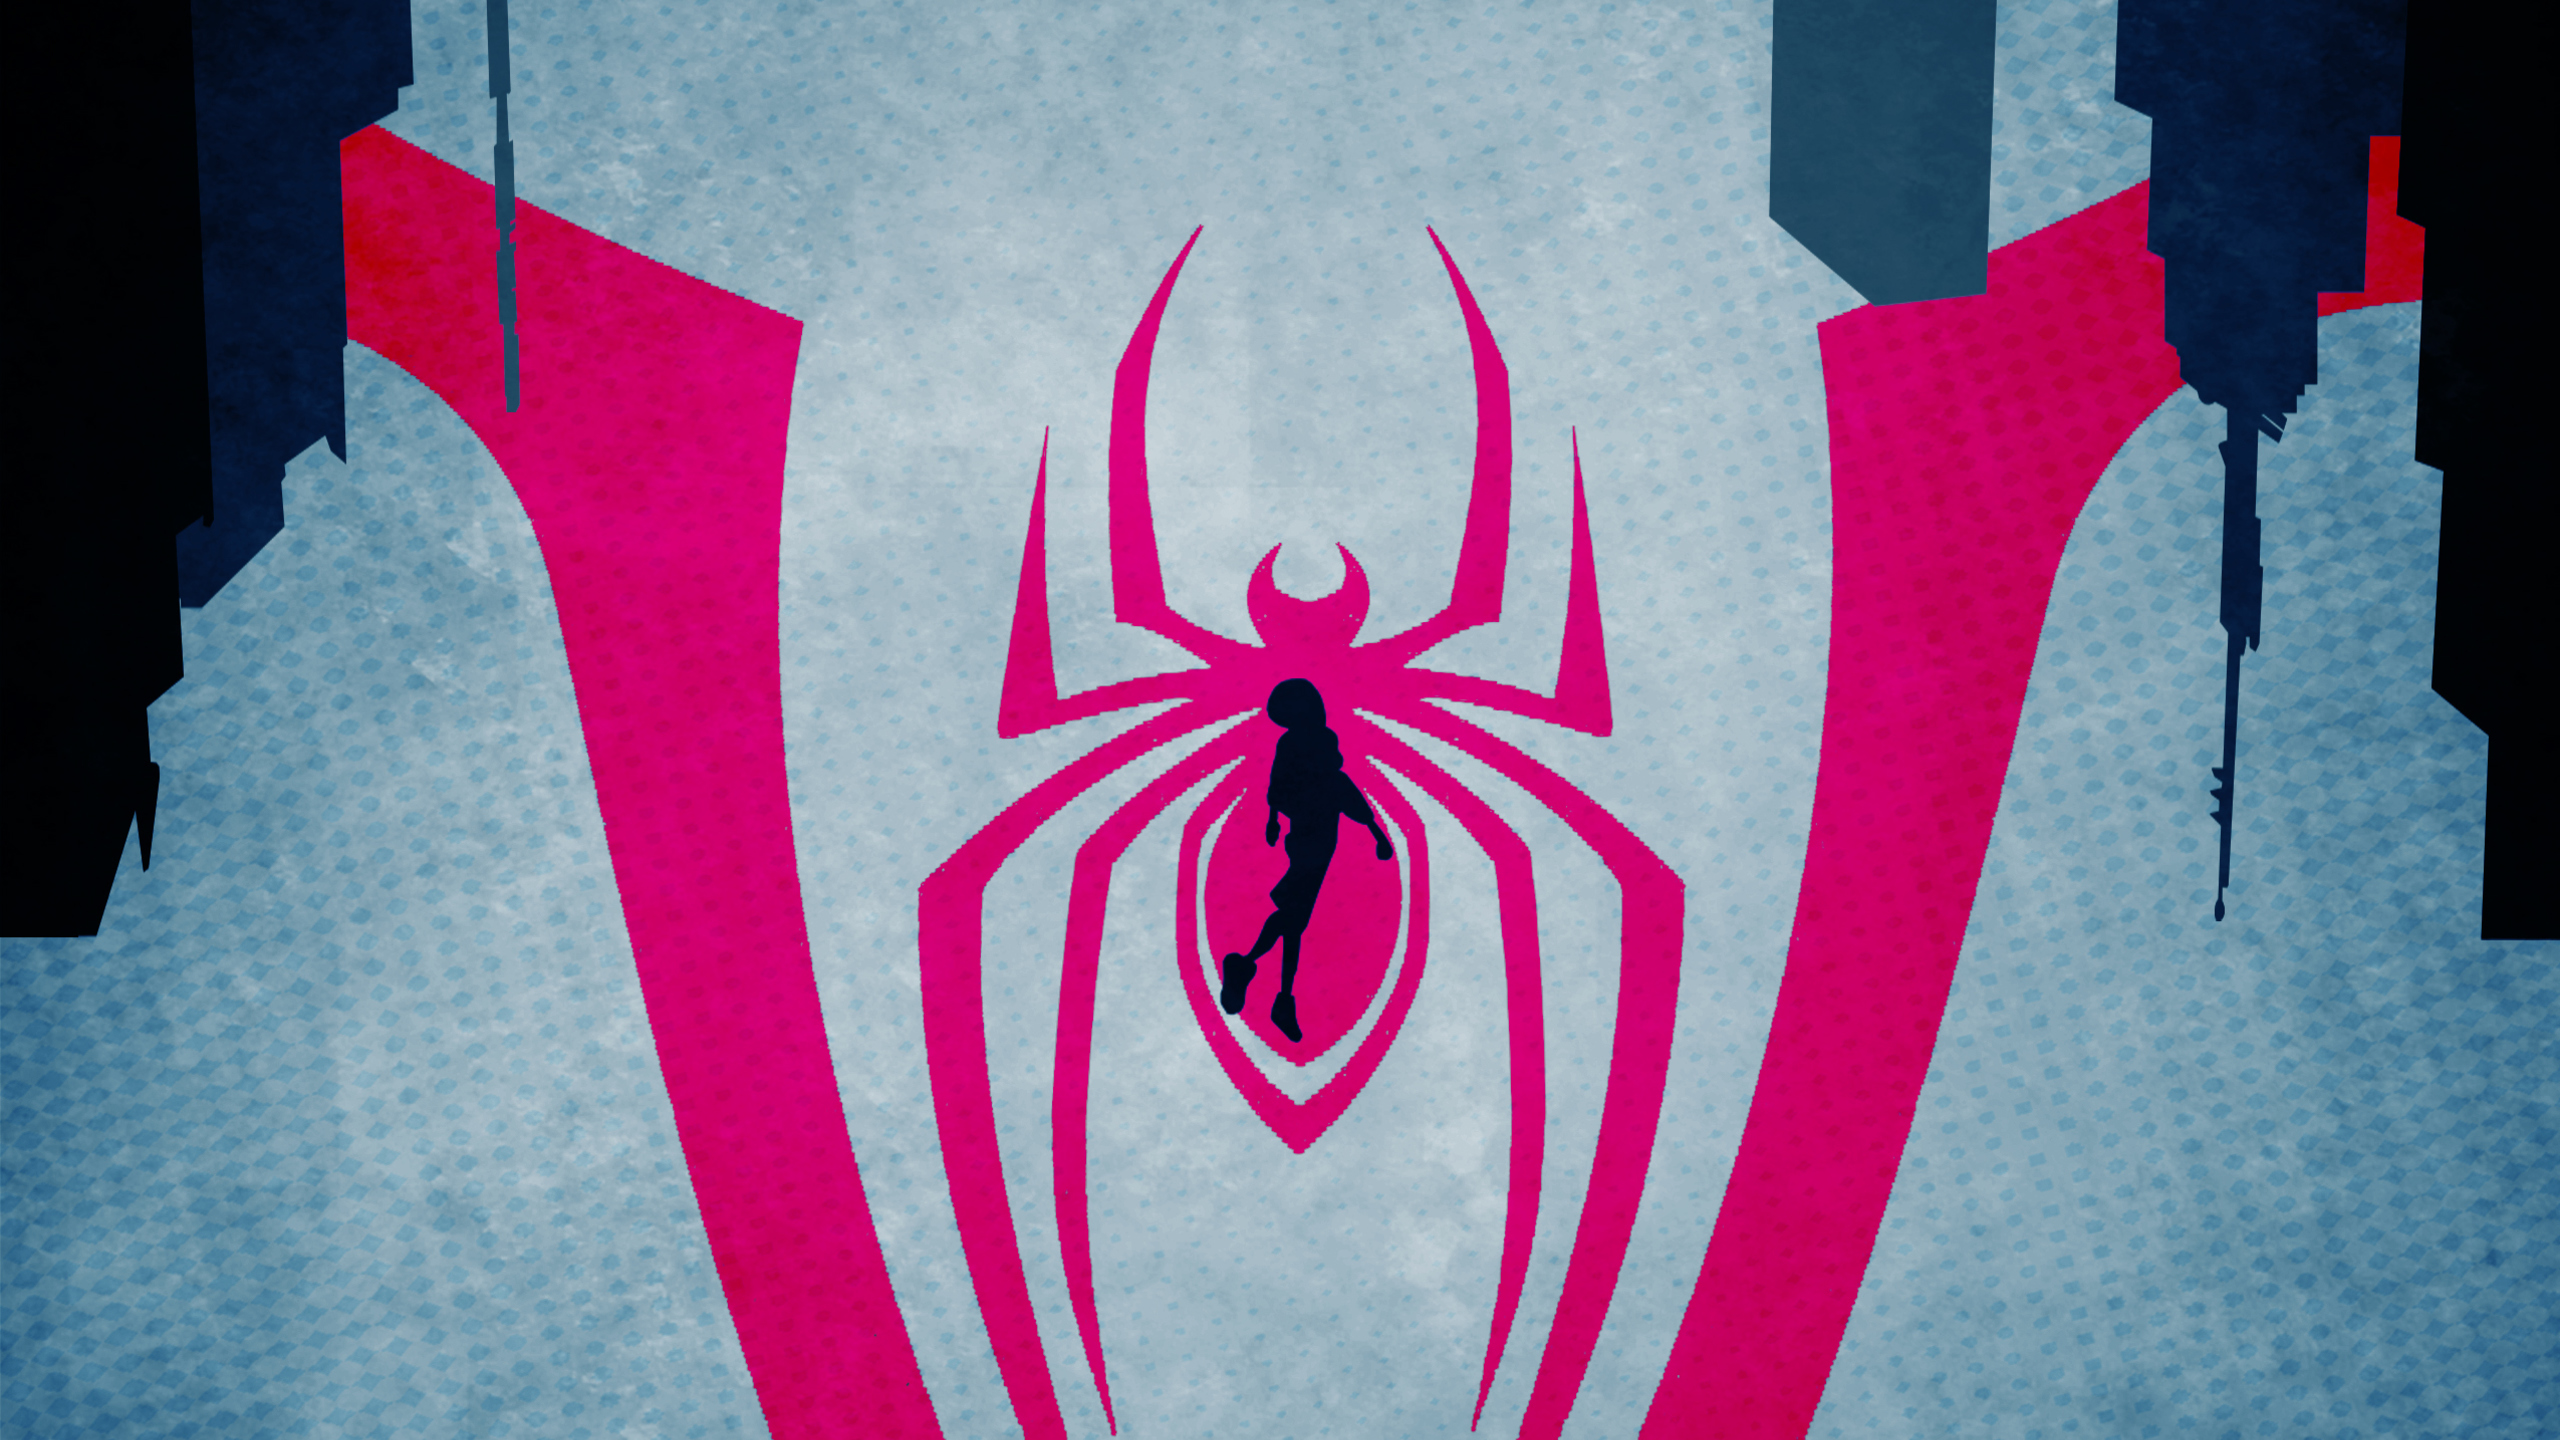 spider man: into the spider verse, miles morales, movie, spider man wallpaper for mobile